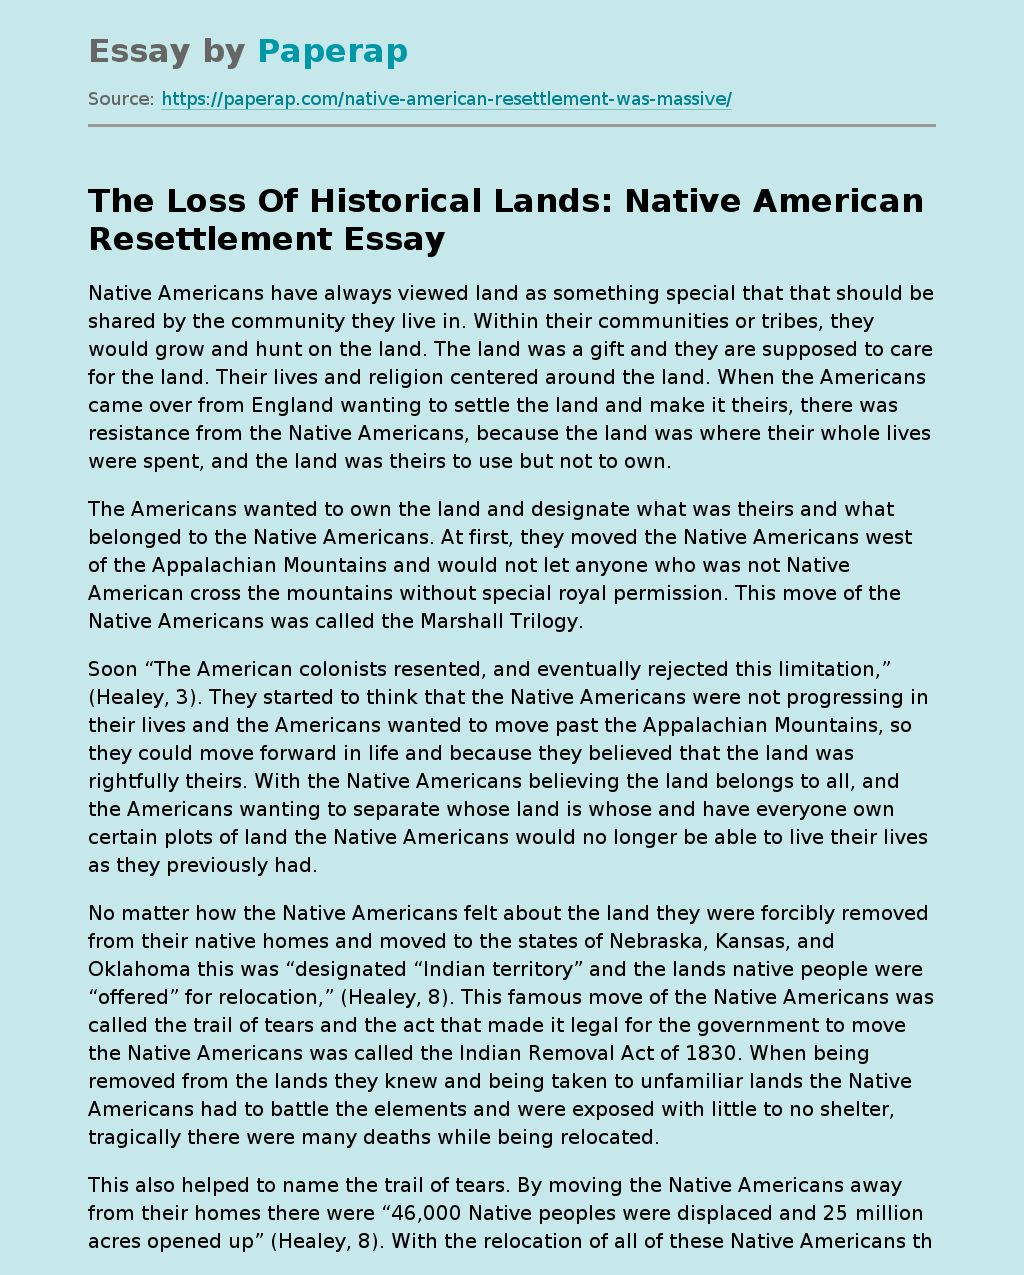 The Loss Of Historical Lands: Native American Resettlement